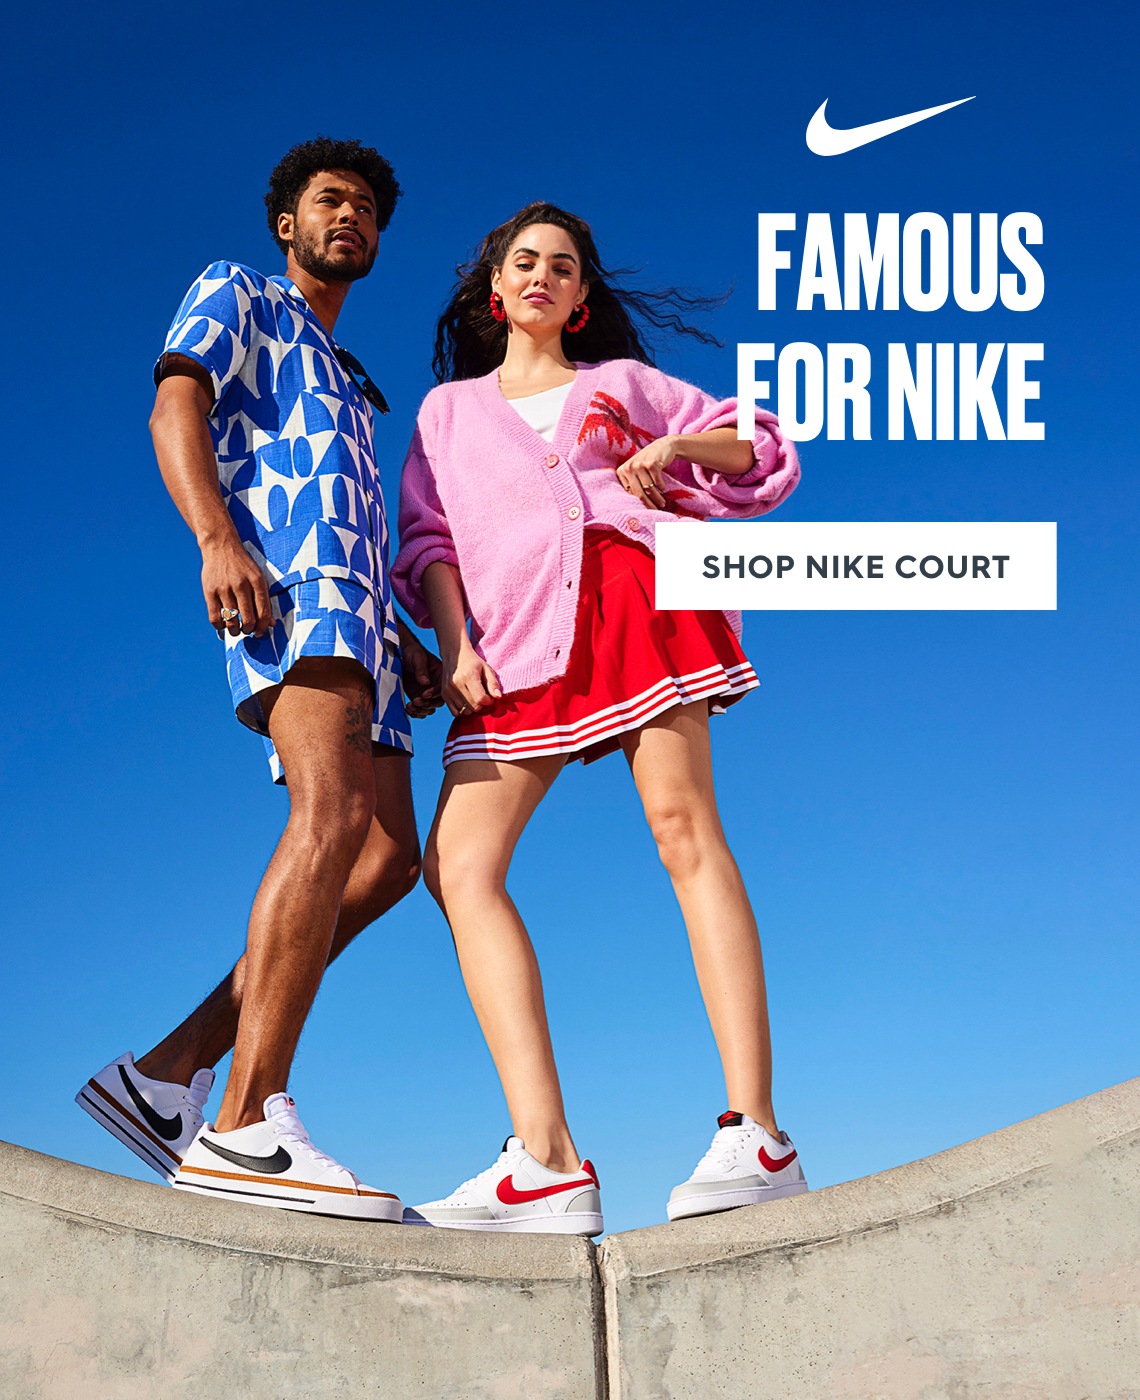 famous for nike